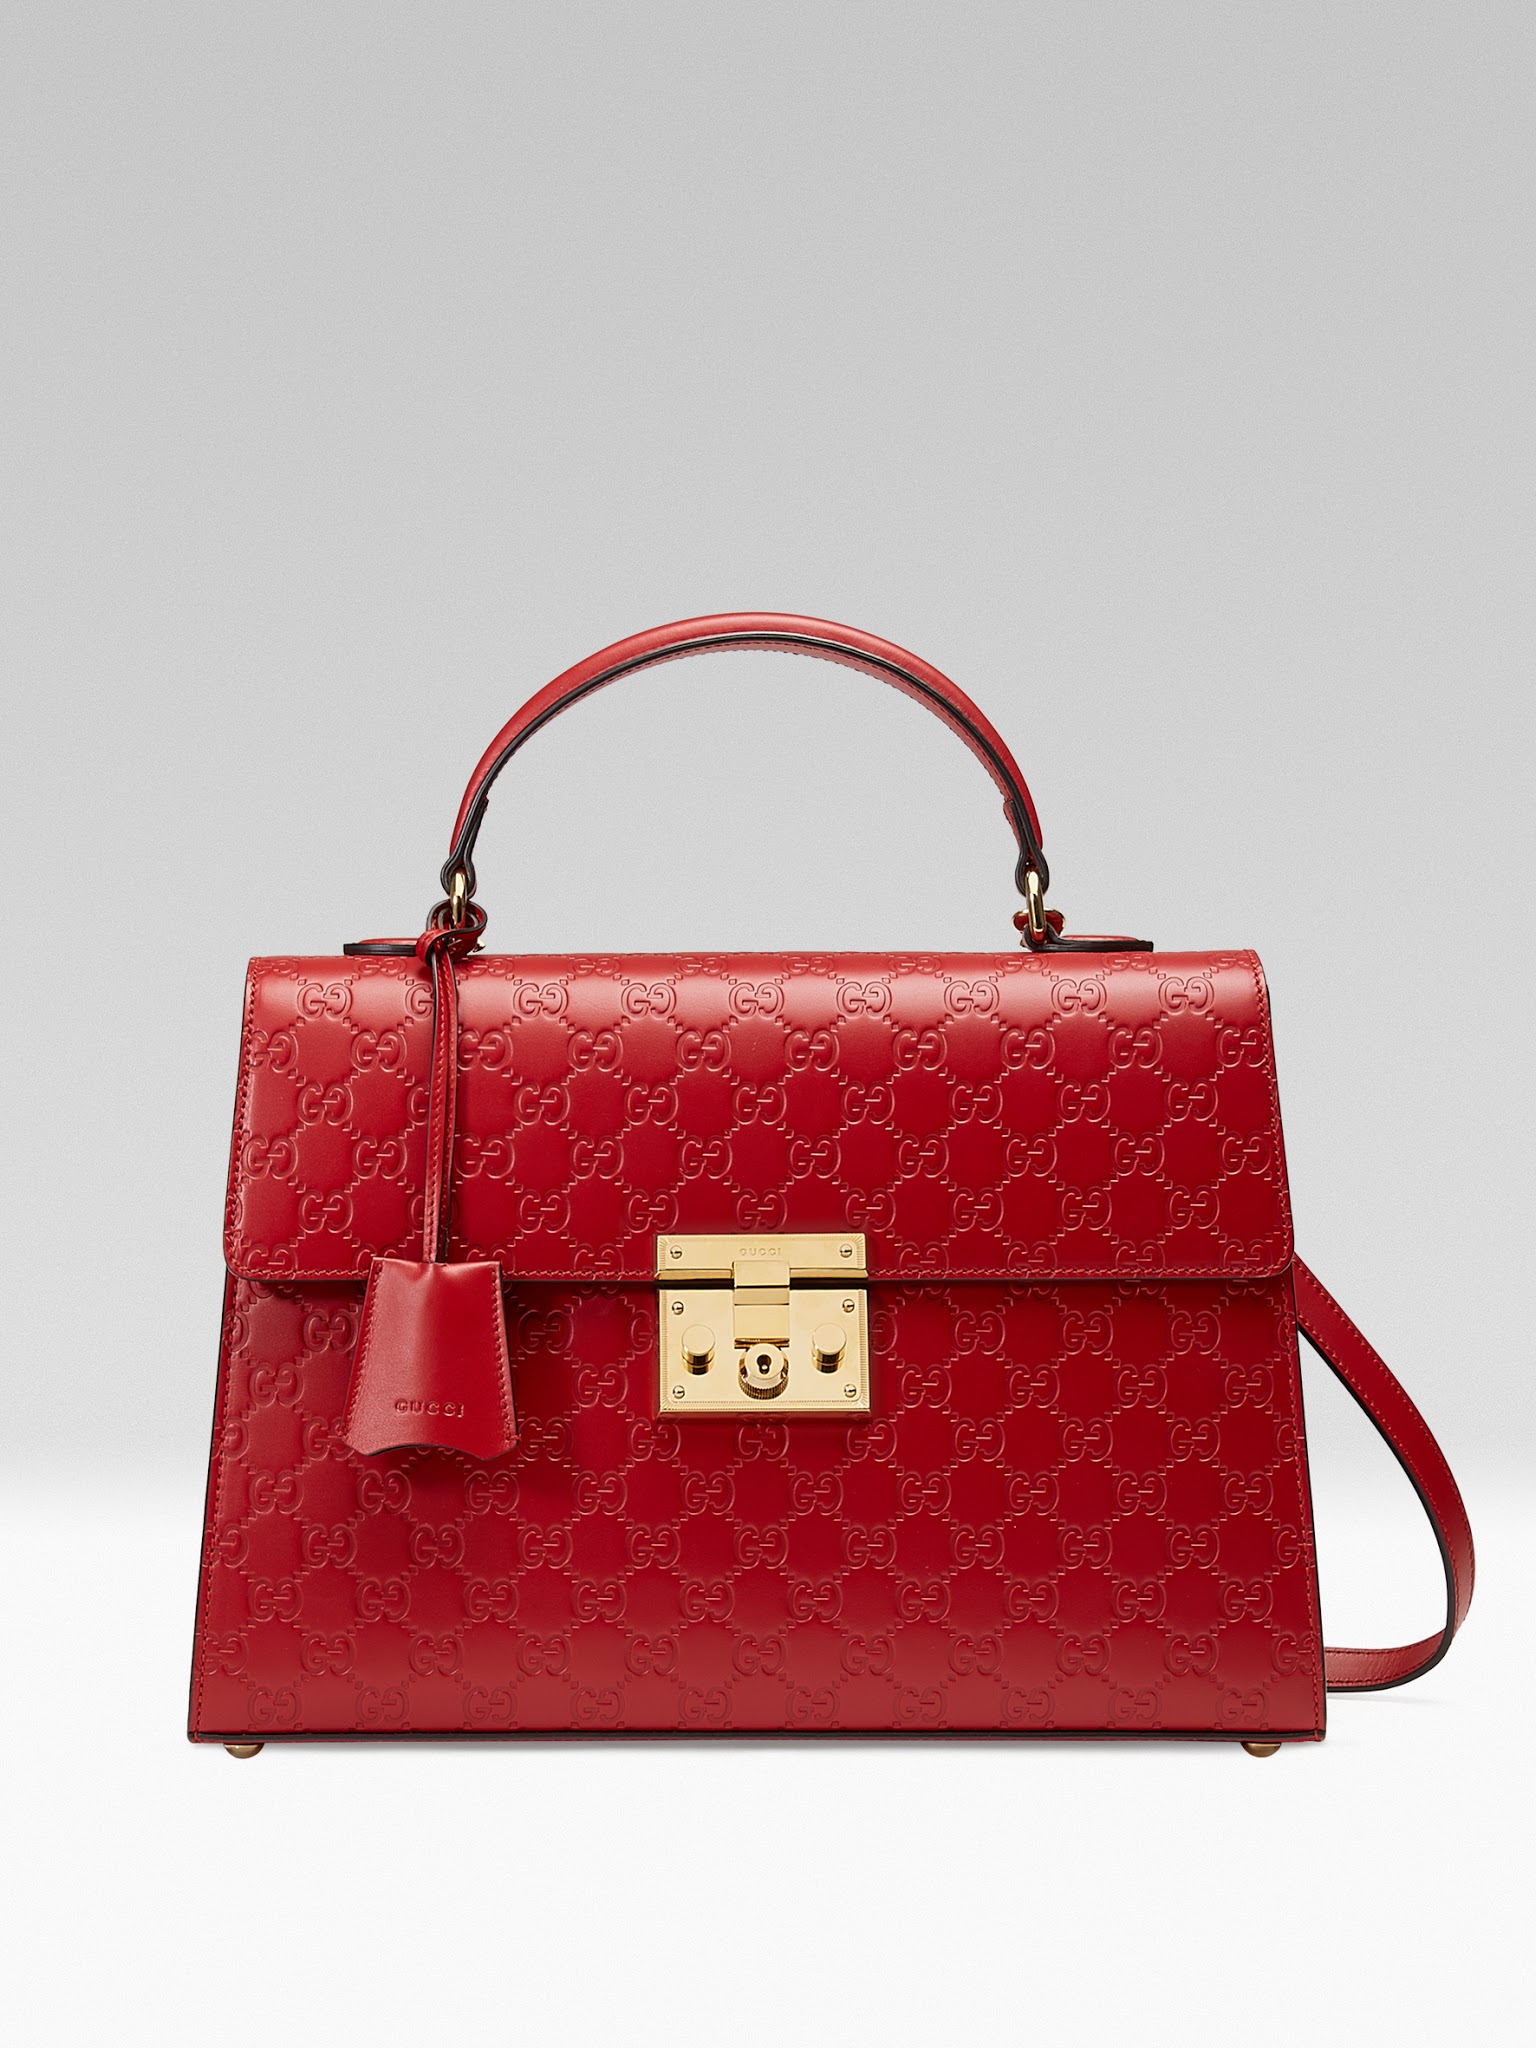 Gucci's Signature Leather Collection